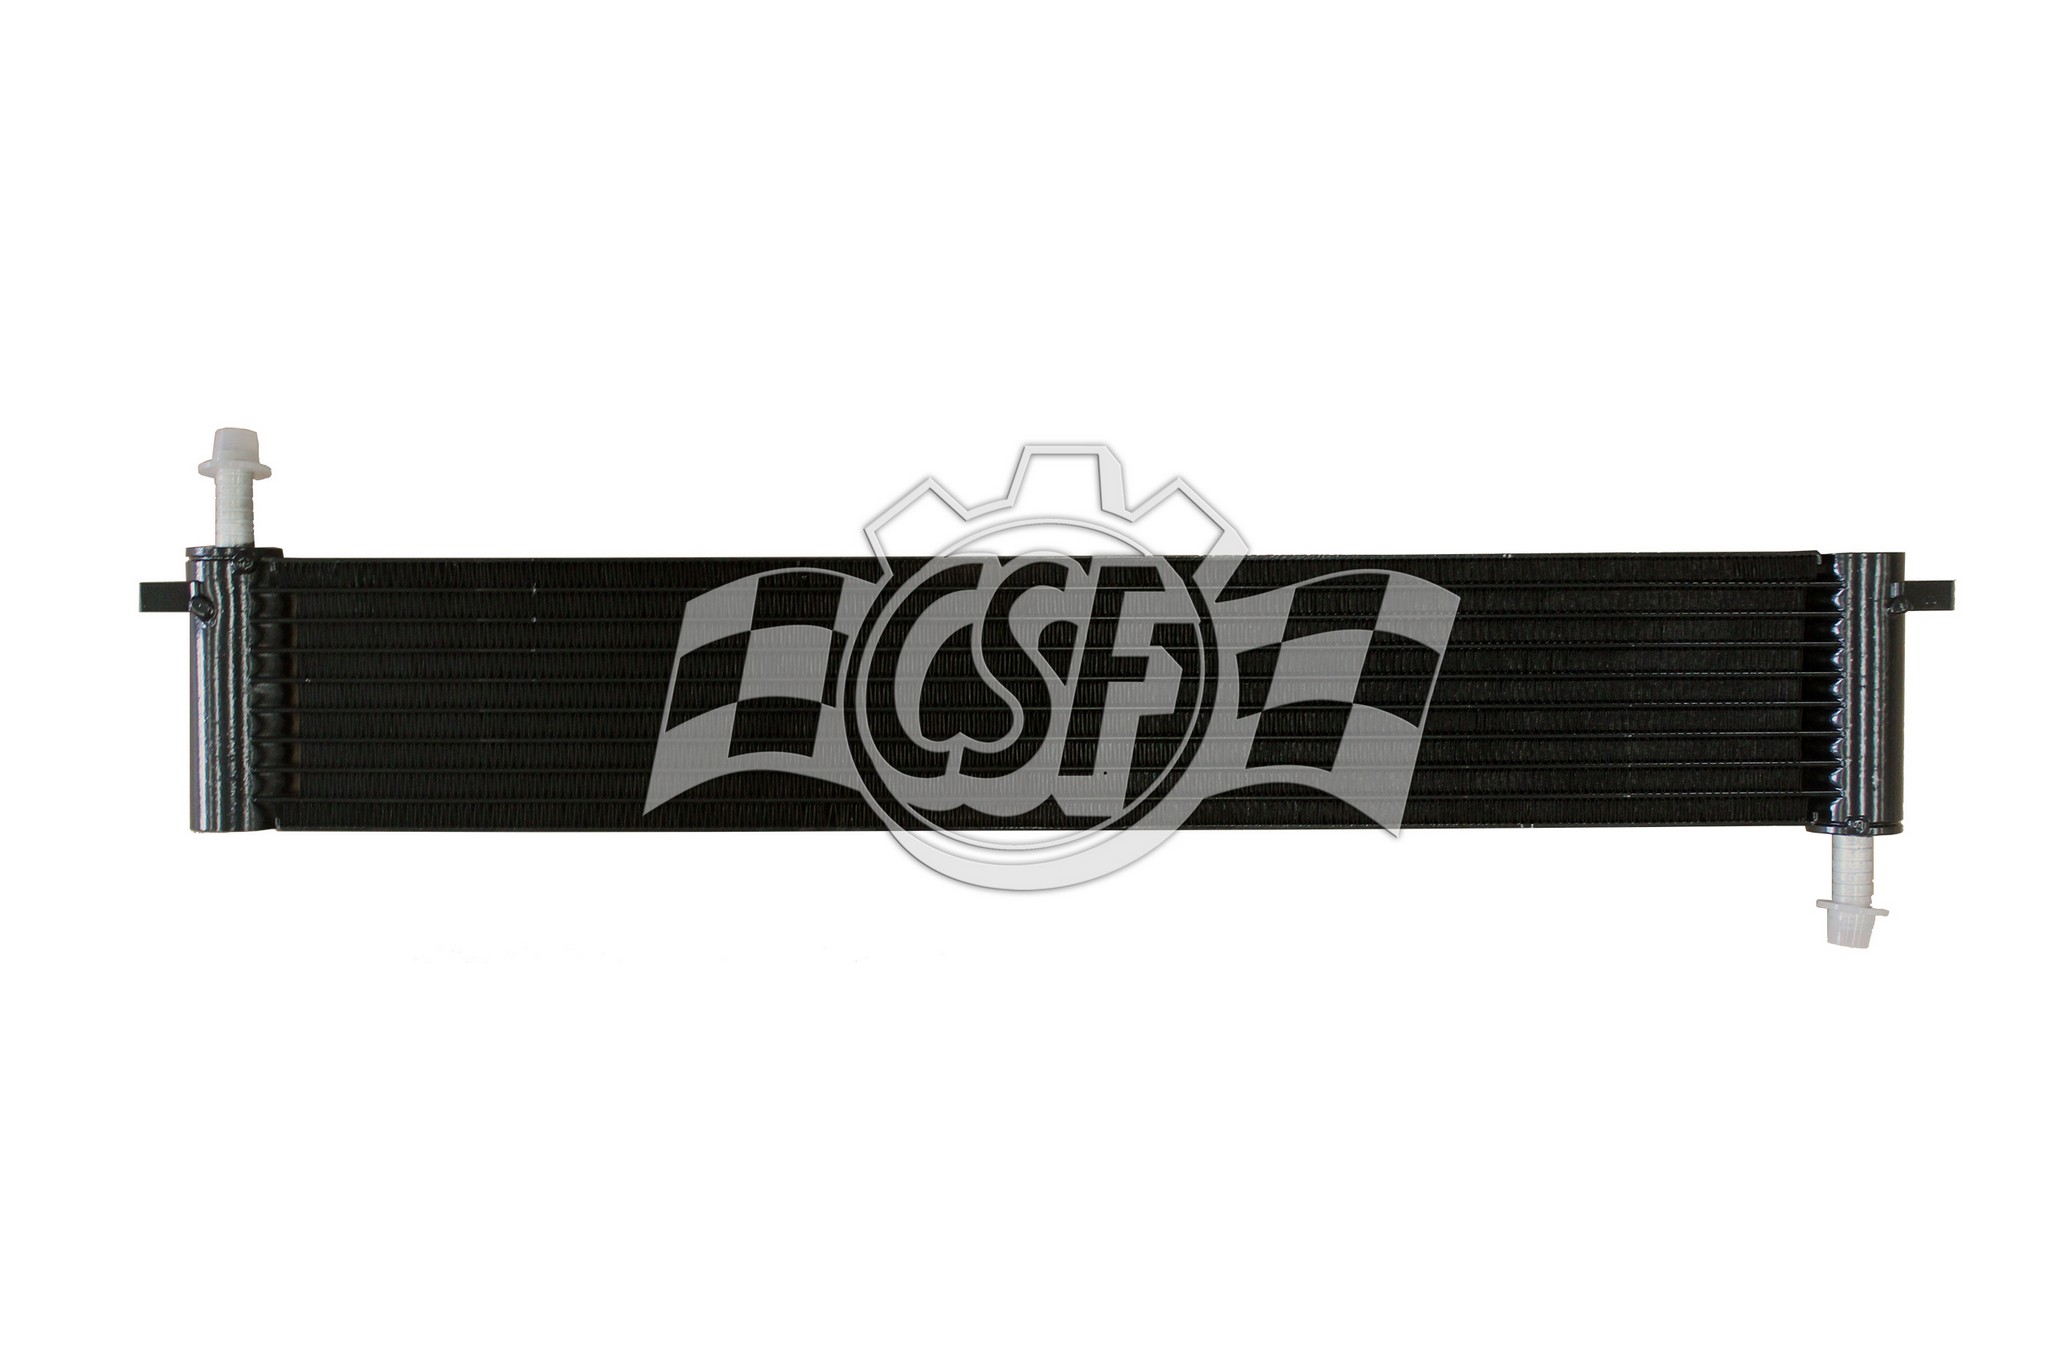 CSF 20023 Automatic Transmission Oil Cooler